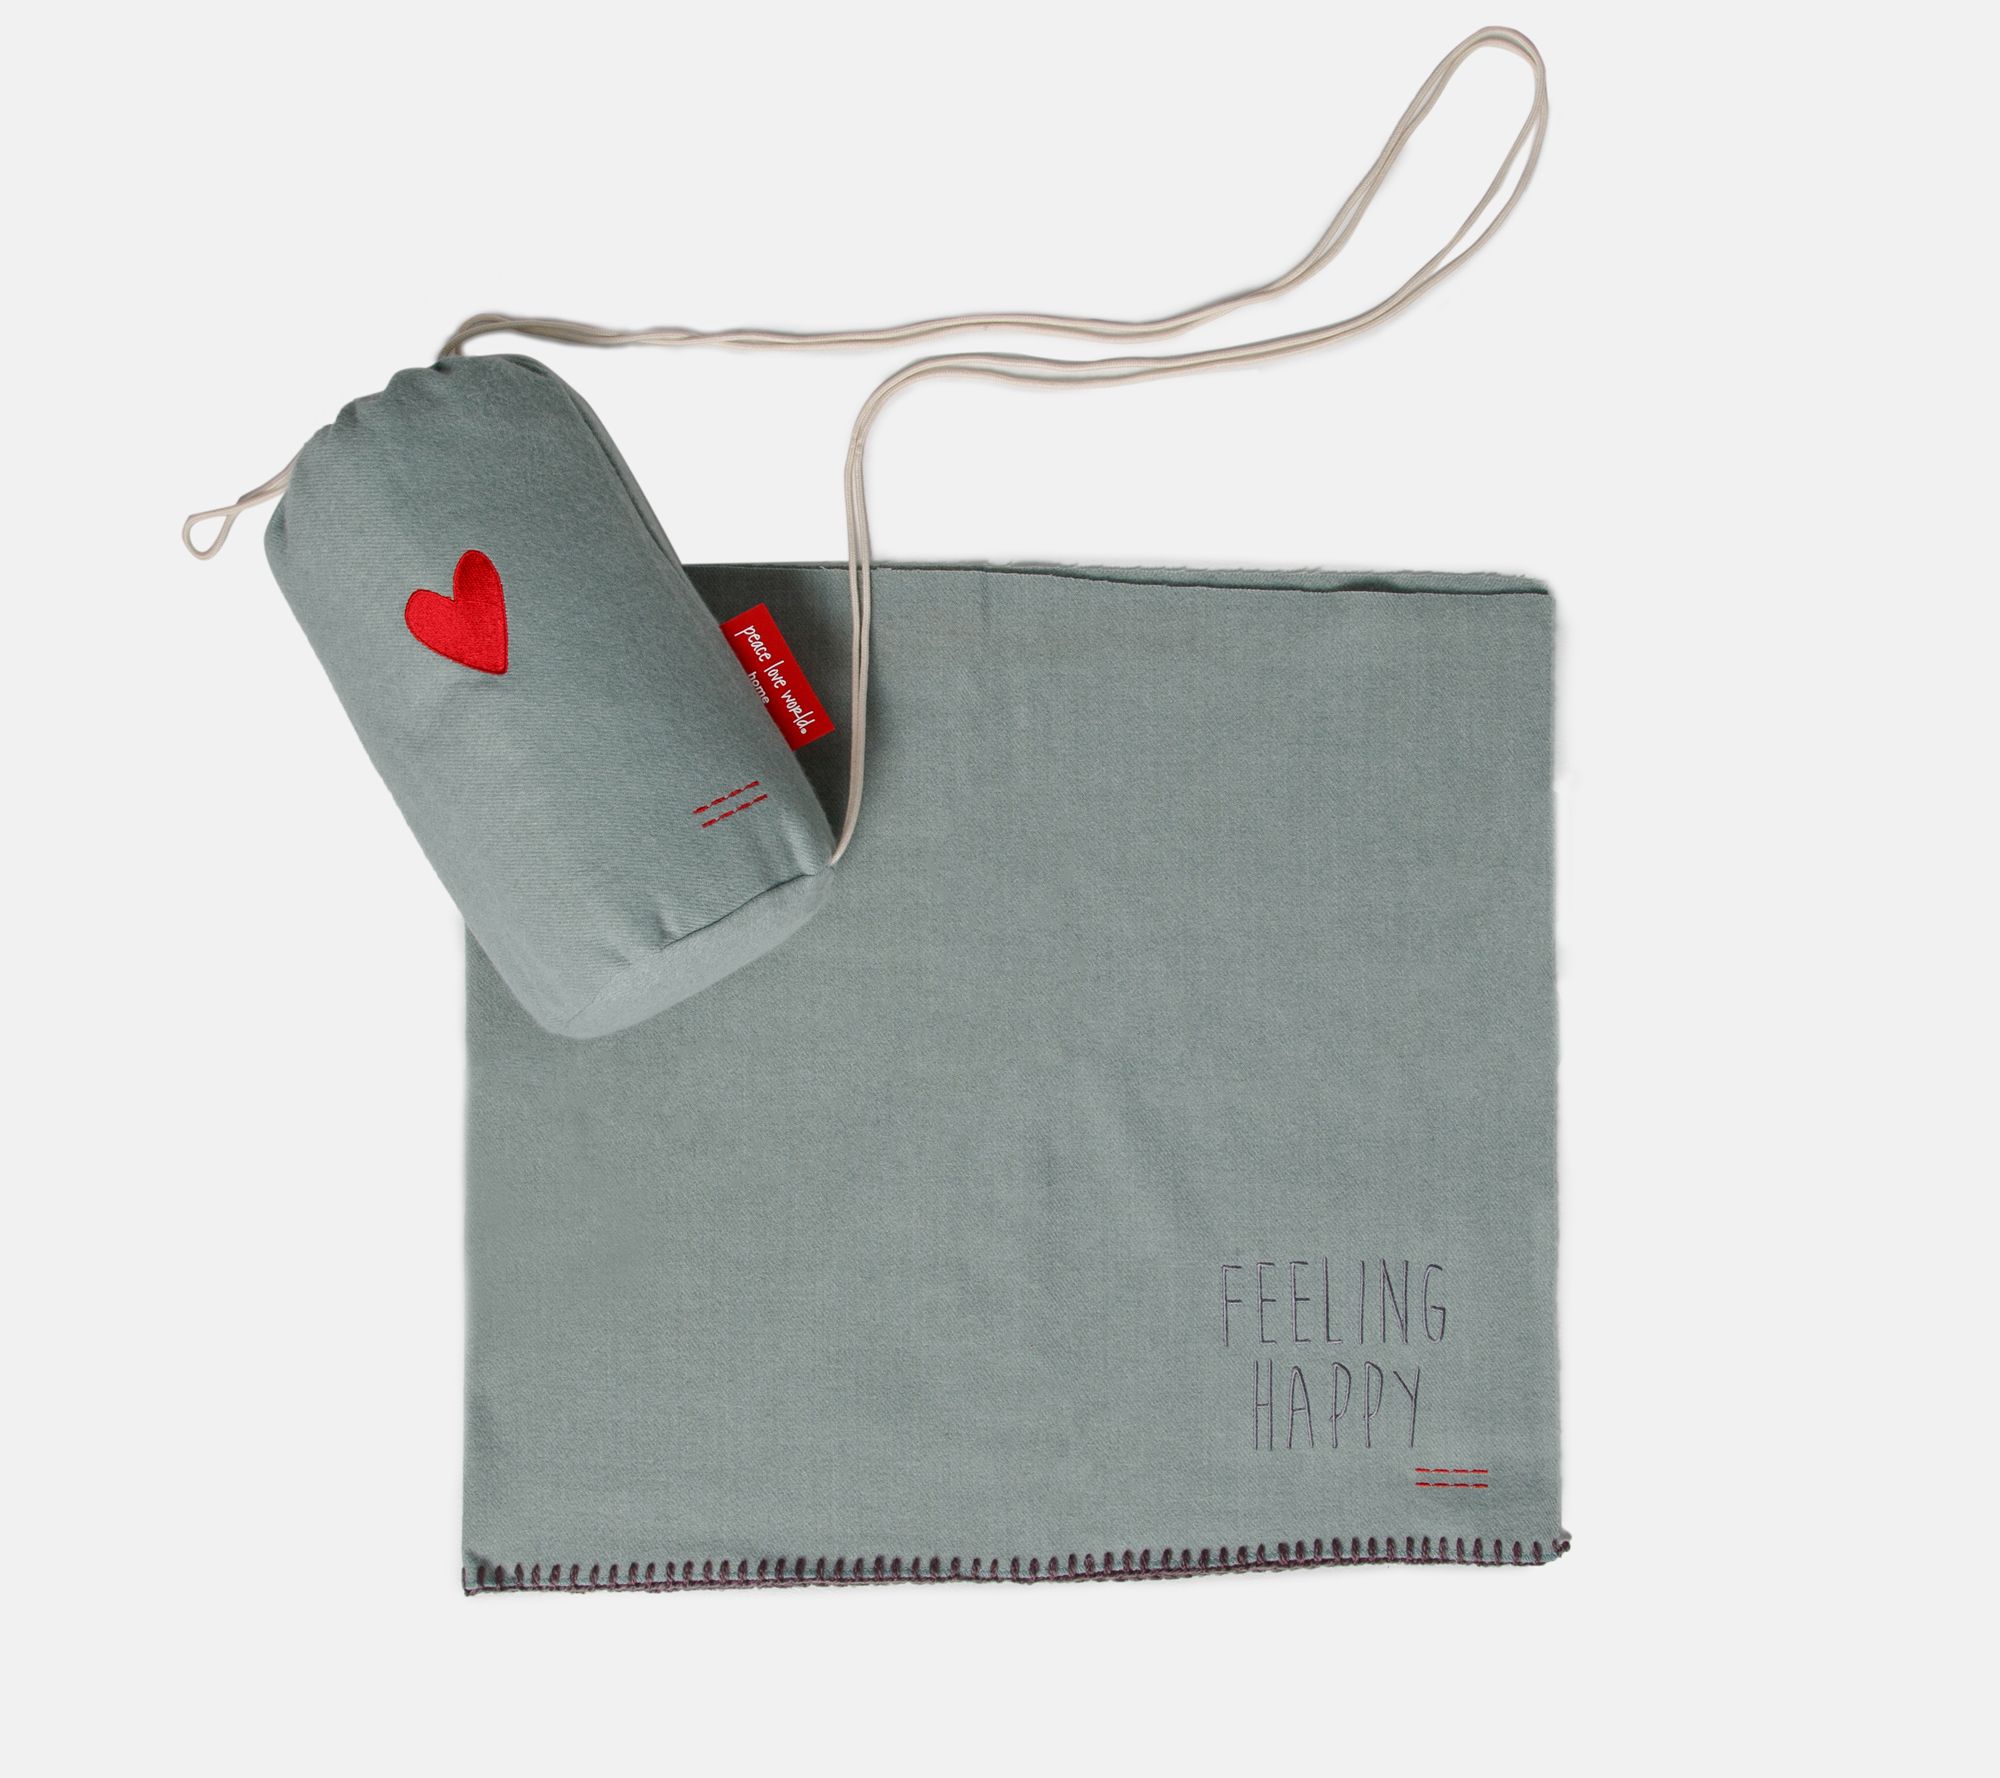 Take 9% off a travel throw with carry bag